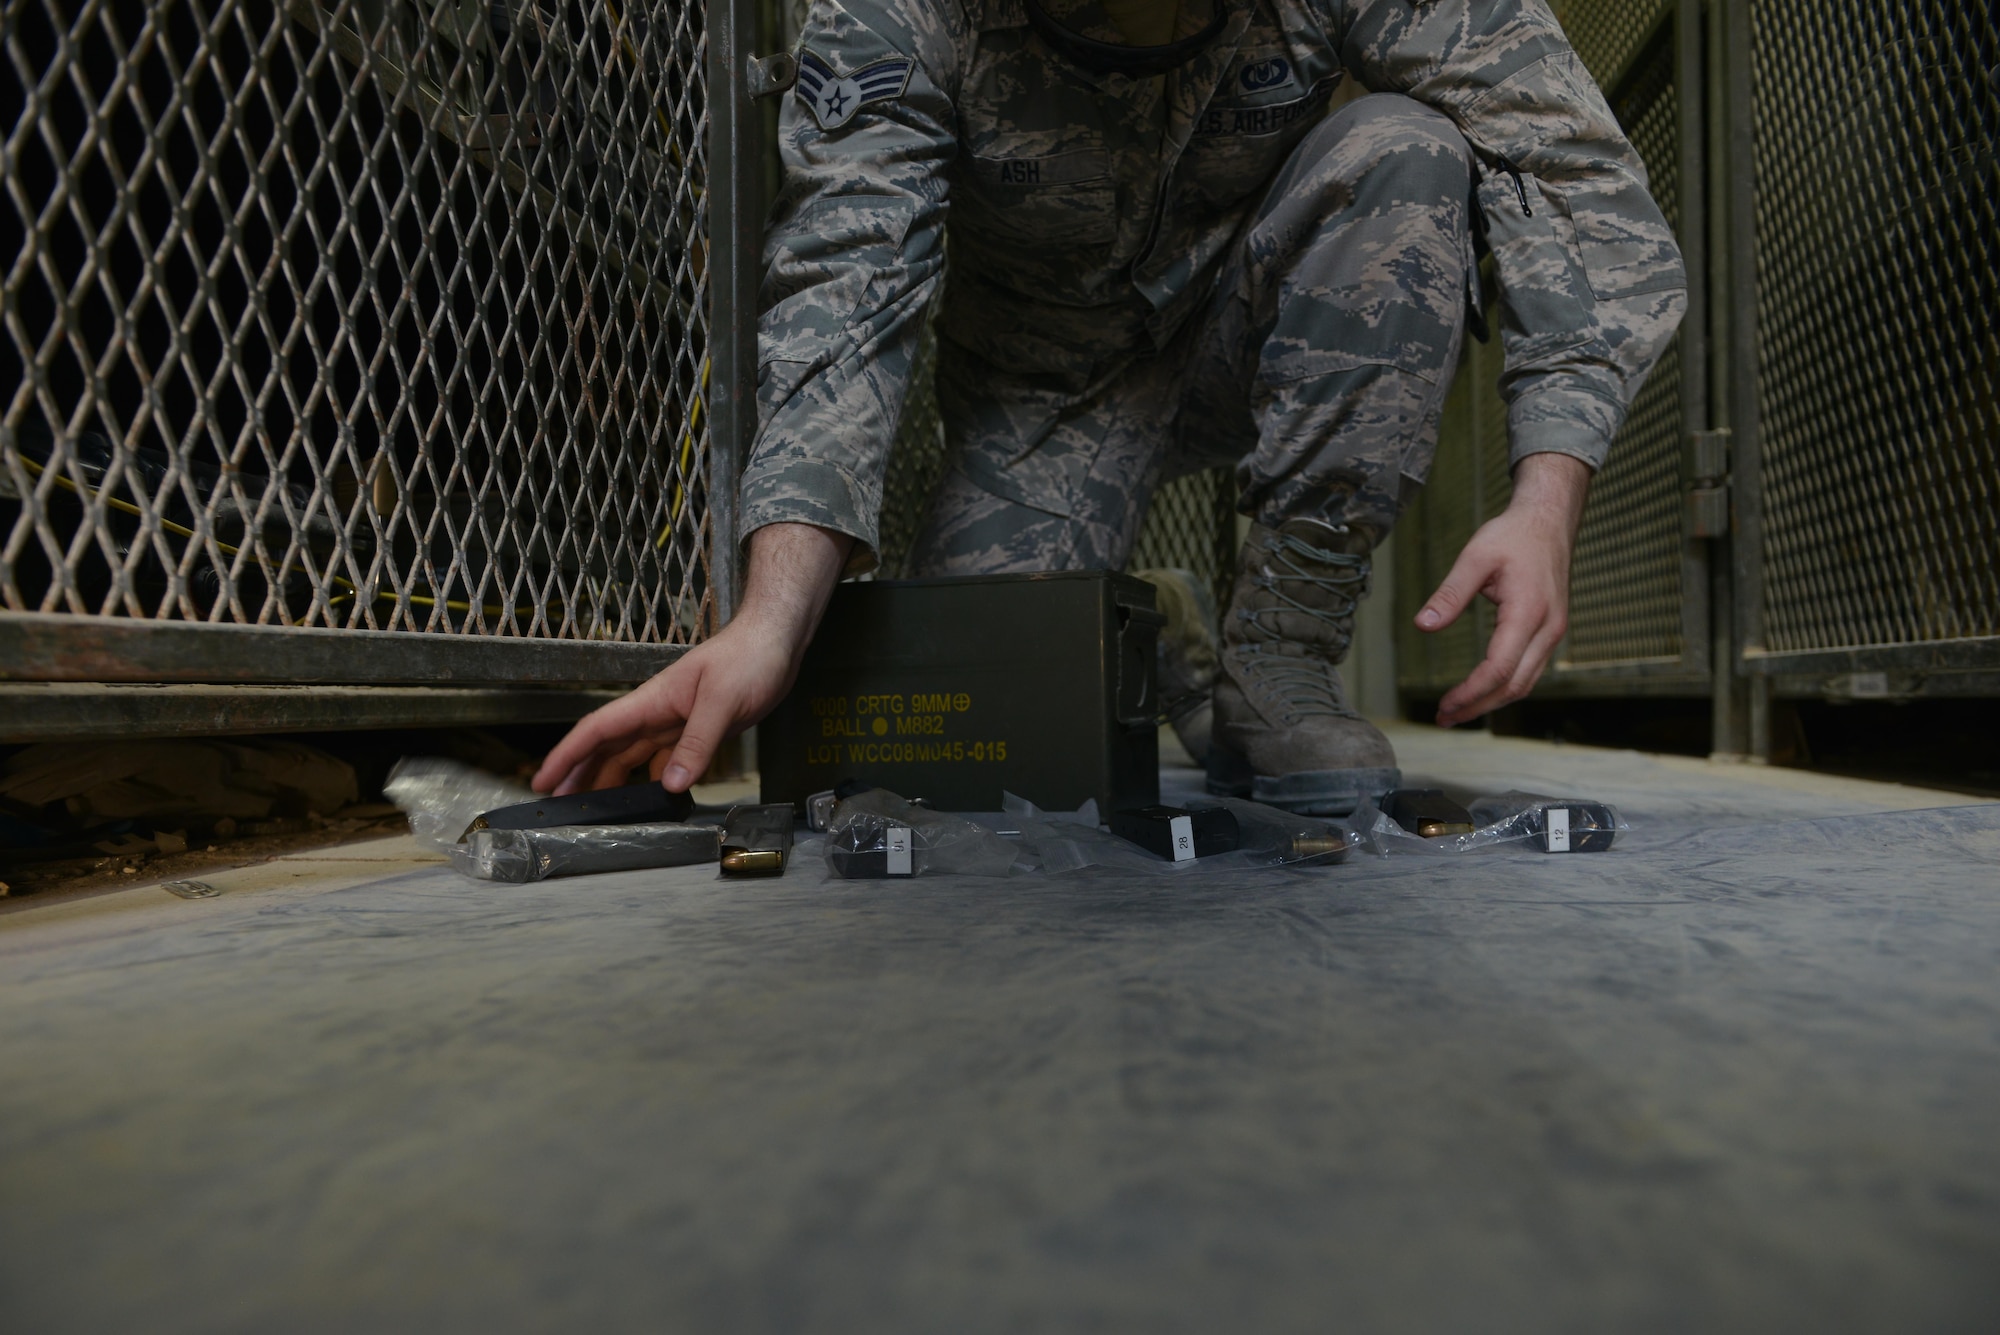 Senior Airman James Ash, 379th Expeditionary Operations Support Squadron Aircrew Flight Equipment, separates M-9 magazines for each crew member that will be armed prior to take off July 29, 2015 at Al Udeid Air Base, Qatar. AFE airmen are responsible for helmet harnesses, life preservers and parachutes.  They also ensure aircrew members are properly armed prior to takeoff and clear them after each mission. (U.S. Air Force photo/Staff Sgt. Alexandre Montes)